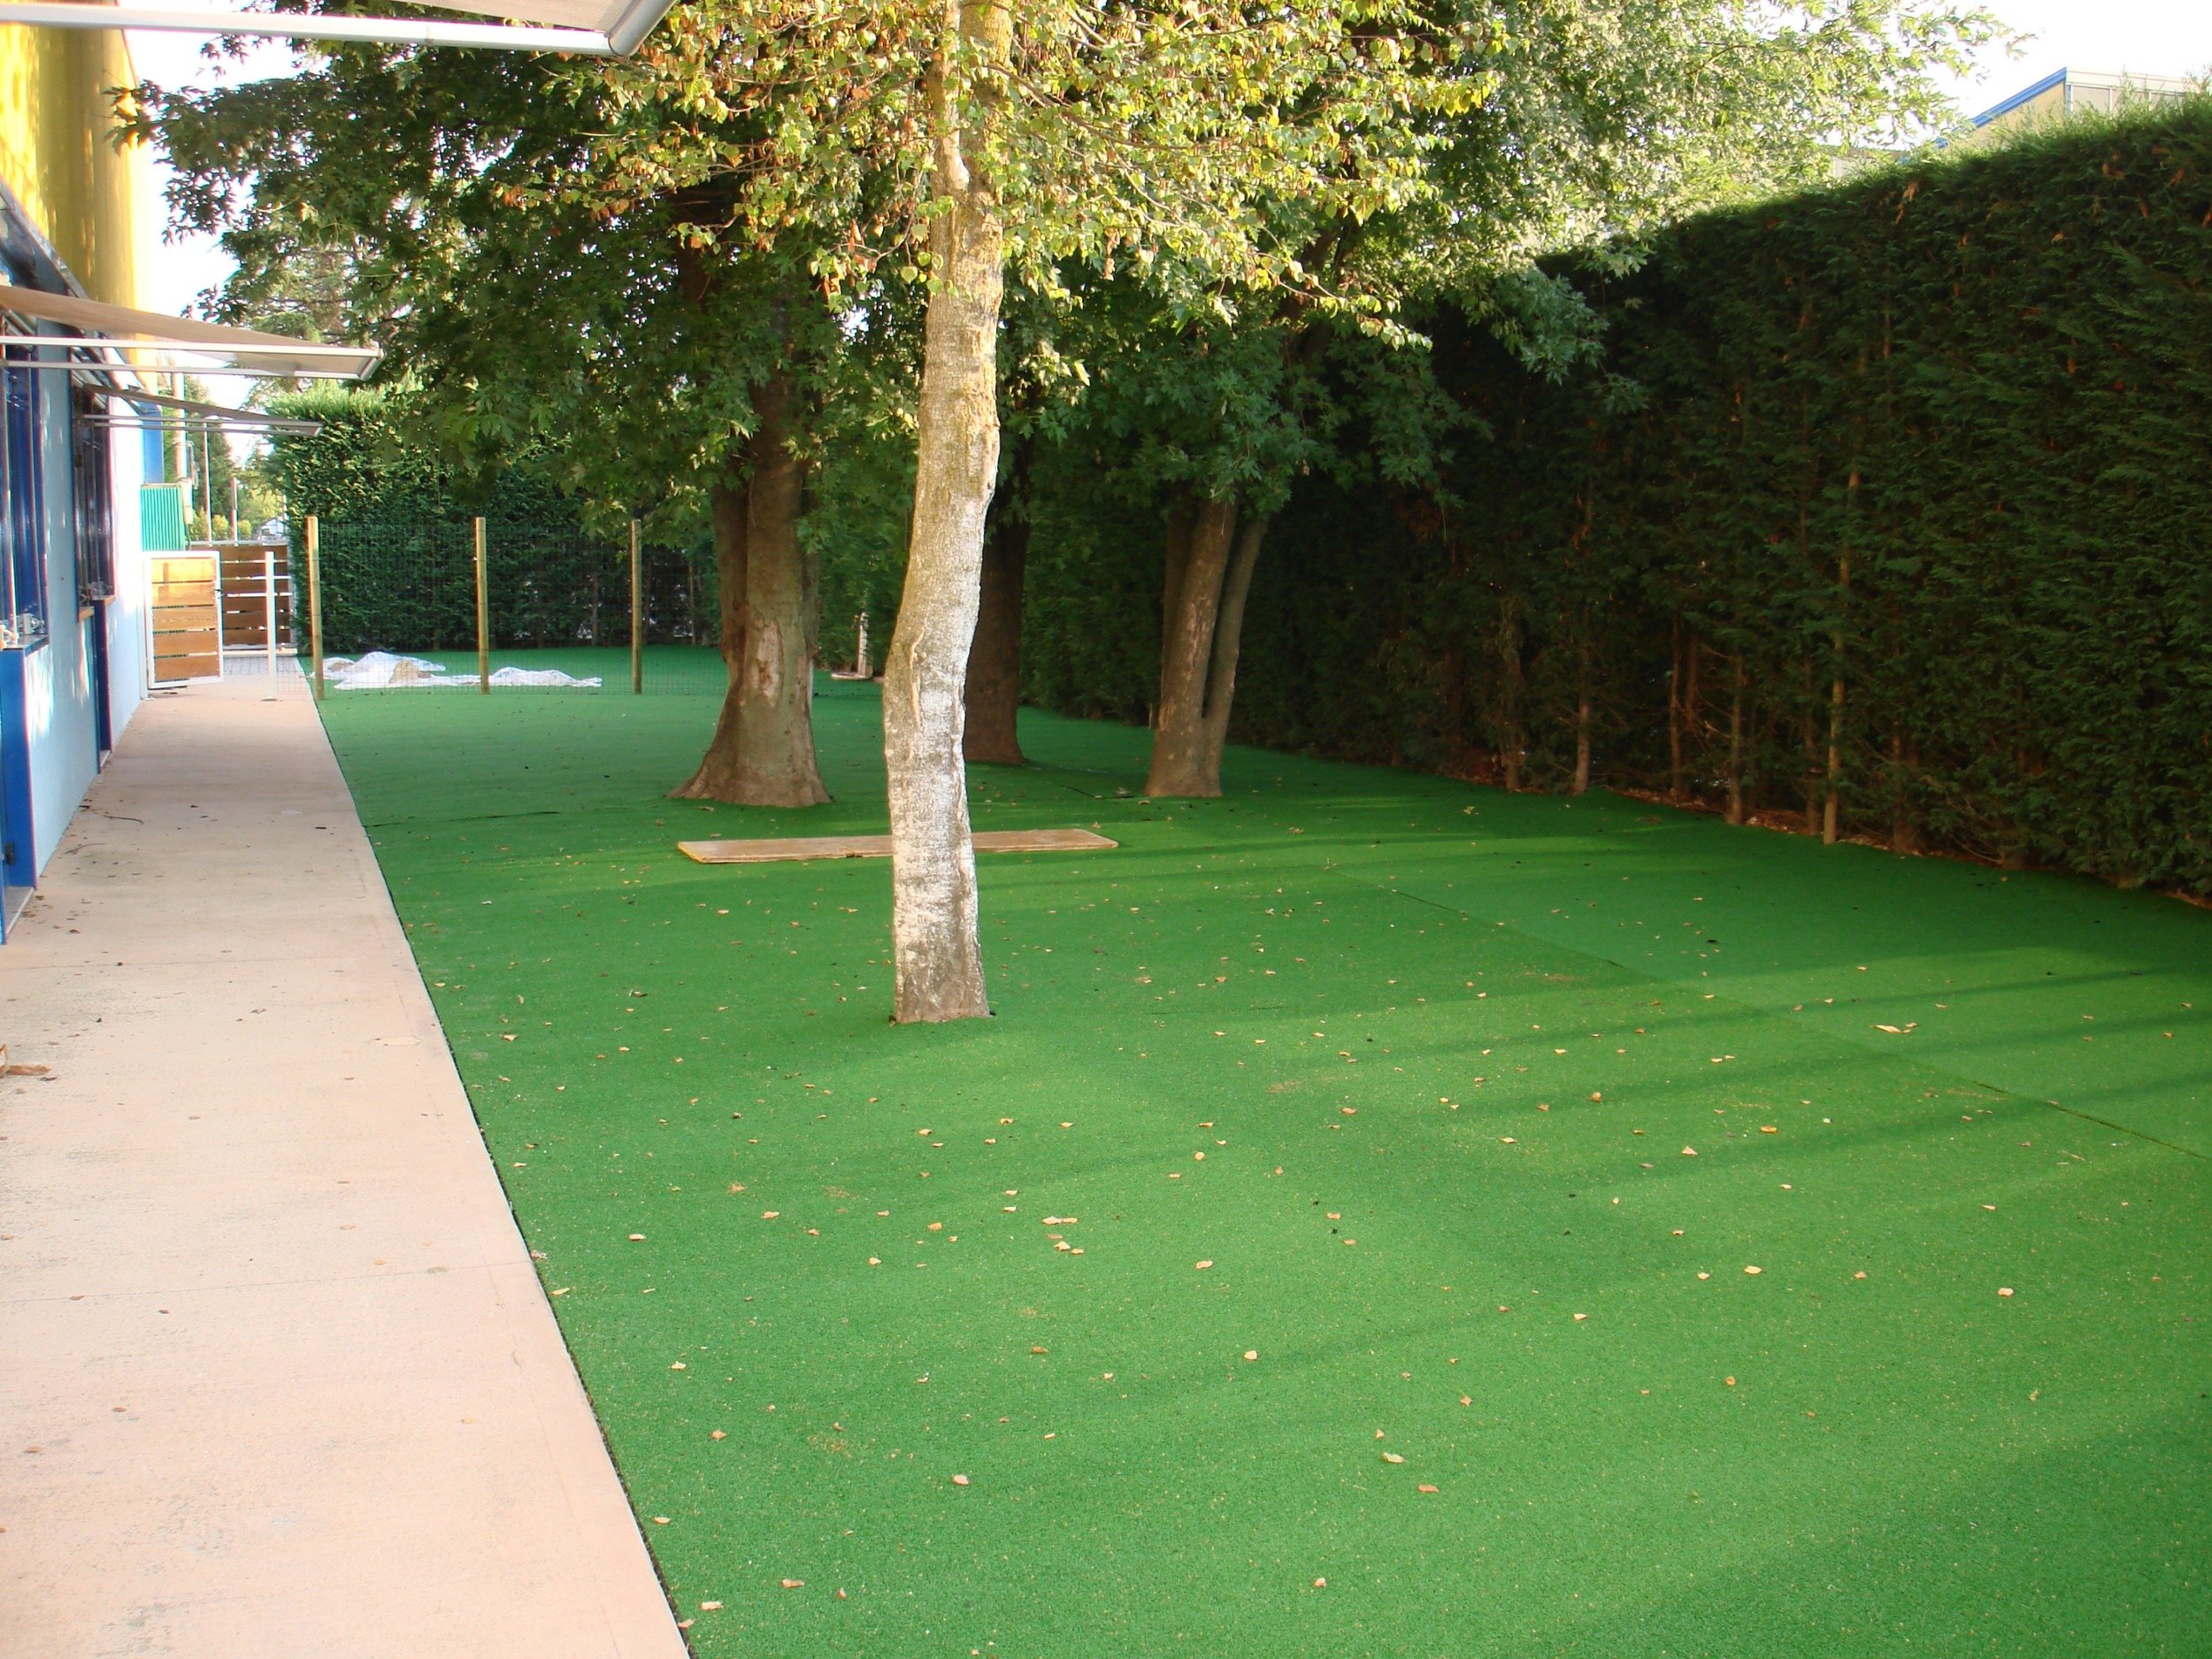 synthetic-grass-sports-flooring-eco-floor-15-by-piesse_grass-on-floor_home-decor_bohemian-home-decor-yosemite-theater-peacock-decorators-coupon-collection-fall-catalogs-owl.jpg